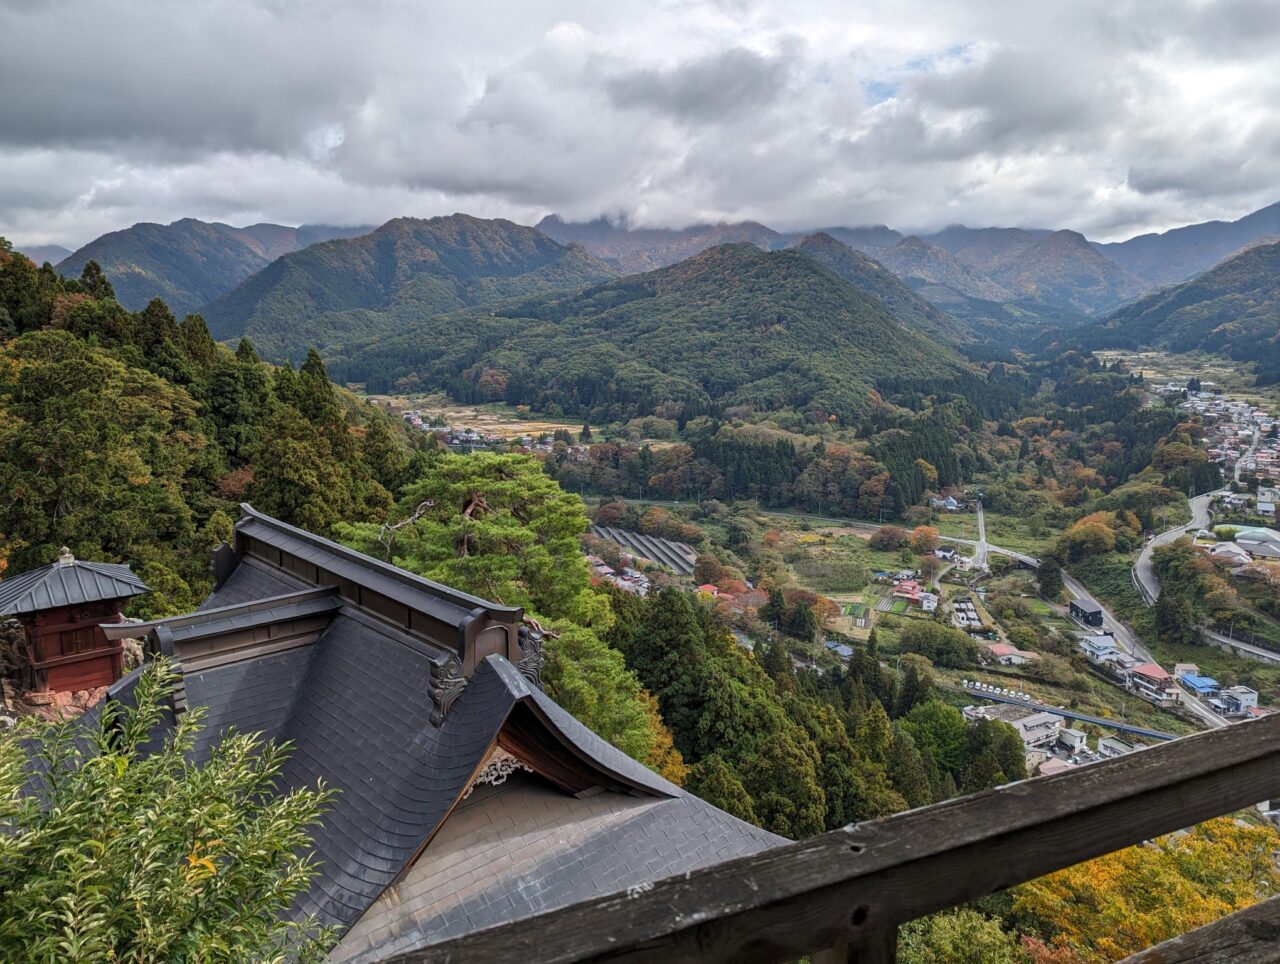 Photo taken from the top of Risshaku-ji temple, Yamadera, Yamagata, Japan. It shows temple buildings in the foreground, and a beautiful valley in the background.